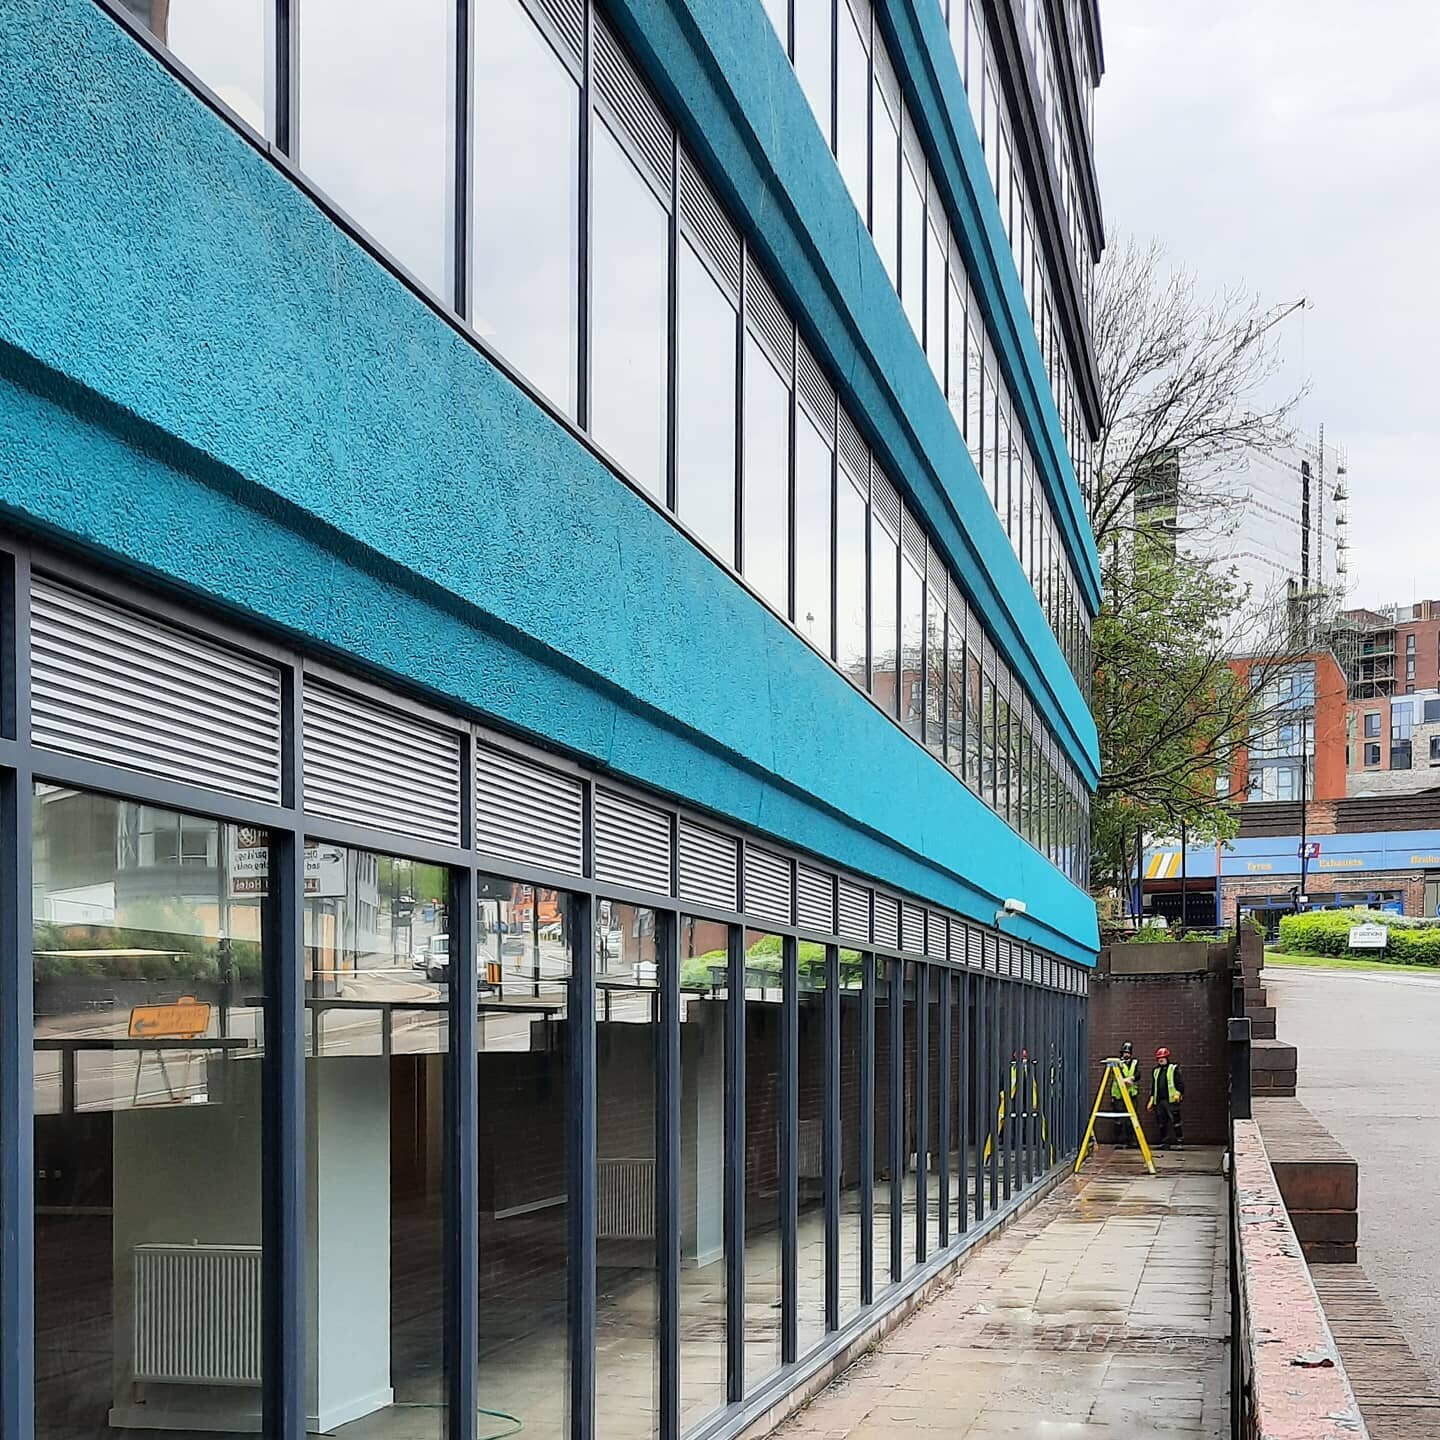 The hoarding has been removed at Pennine Five, Sheffield. Looking excellent!
&nbsp;
#sheffield #sheffieldissuper #P5 #PennnineFive &nbsp;#sheffieldbusiness #construction #architecture #architects #architecturaldesign #commercial #HCD